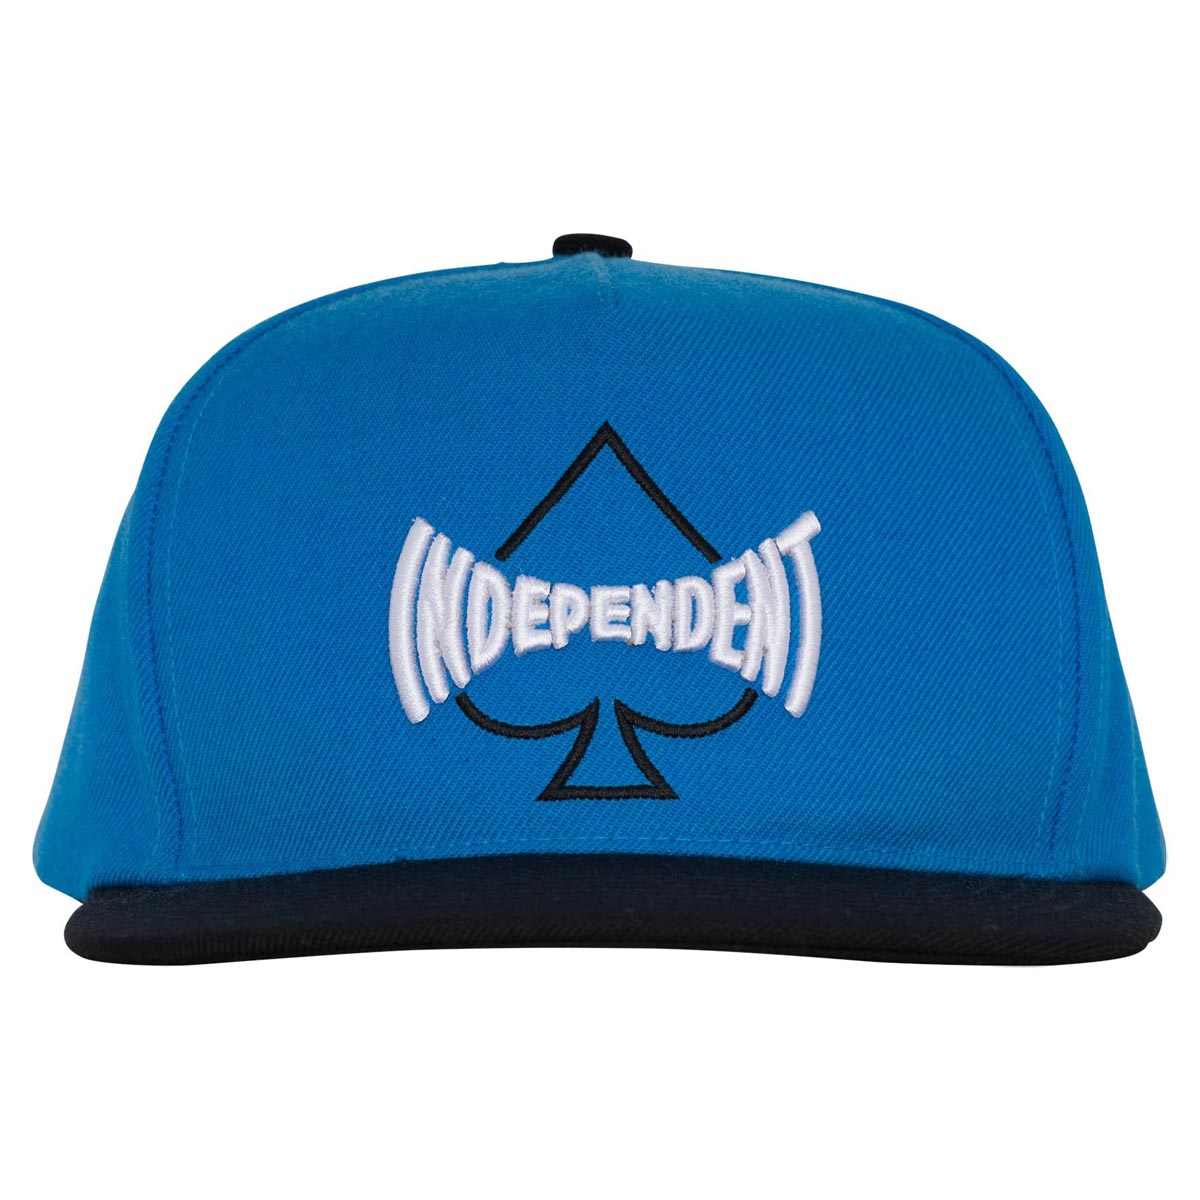 Independent Can't Be Beat Snapback Hat - Blue/Black image 4